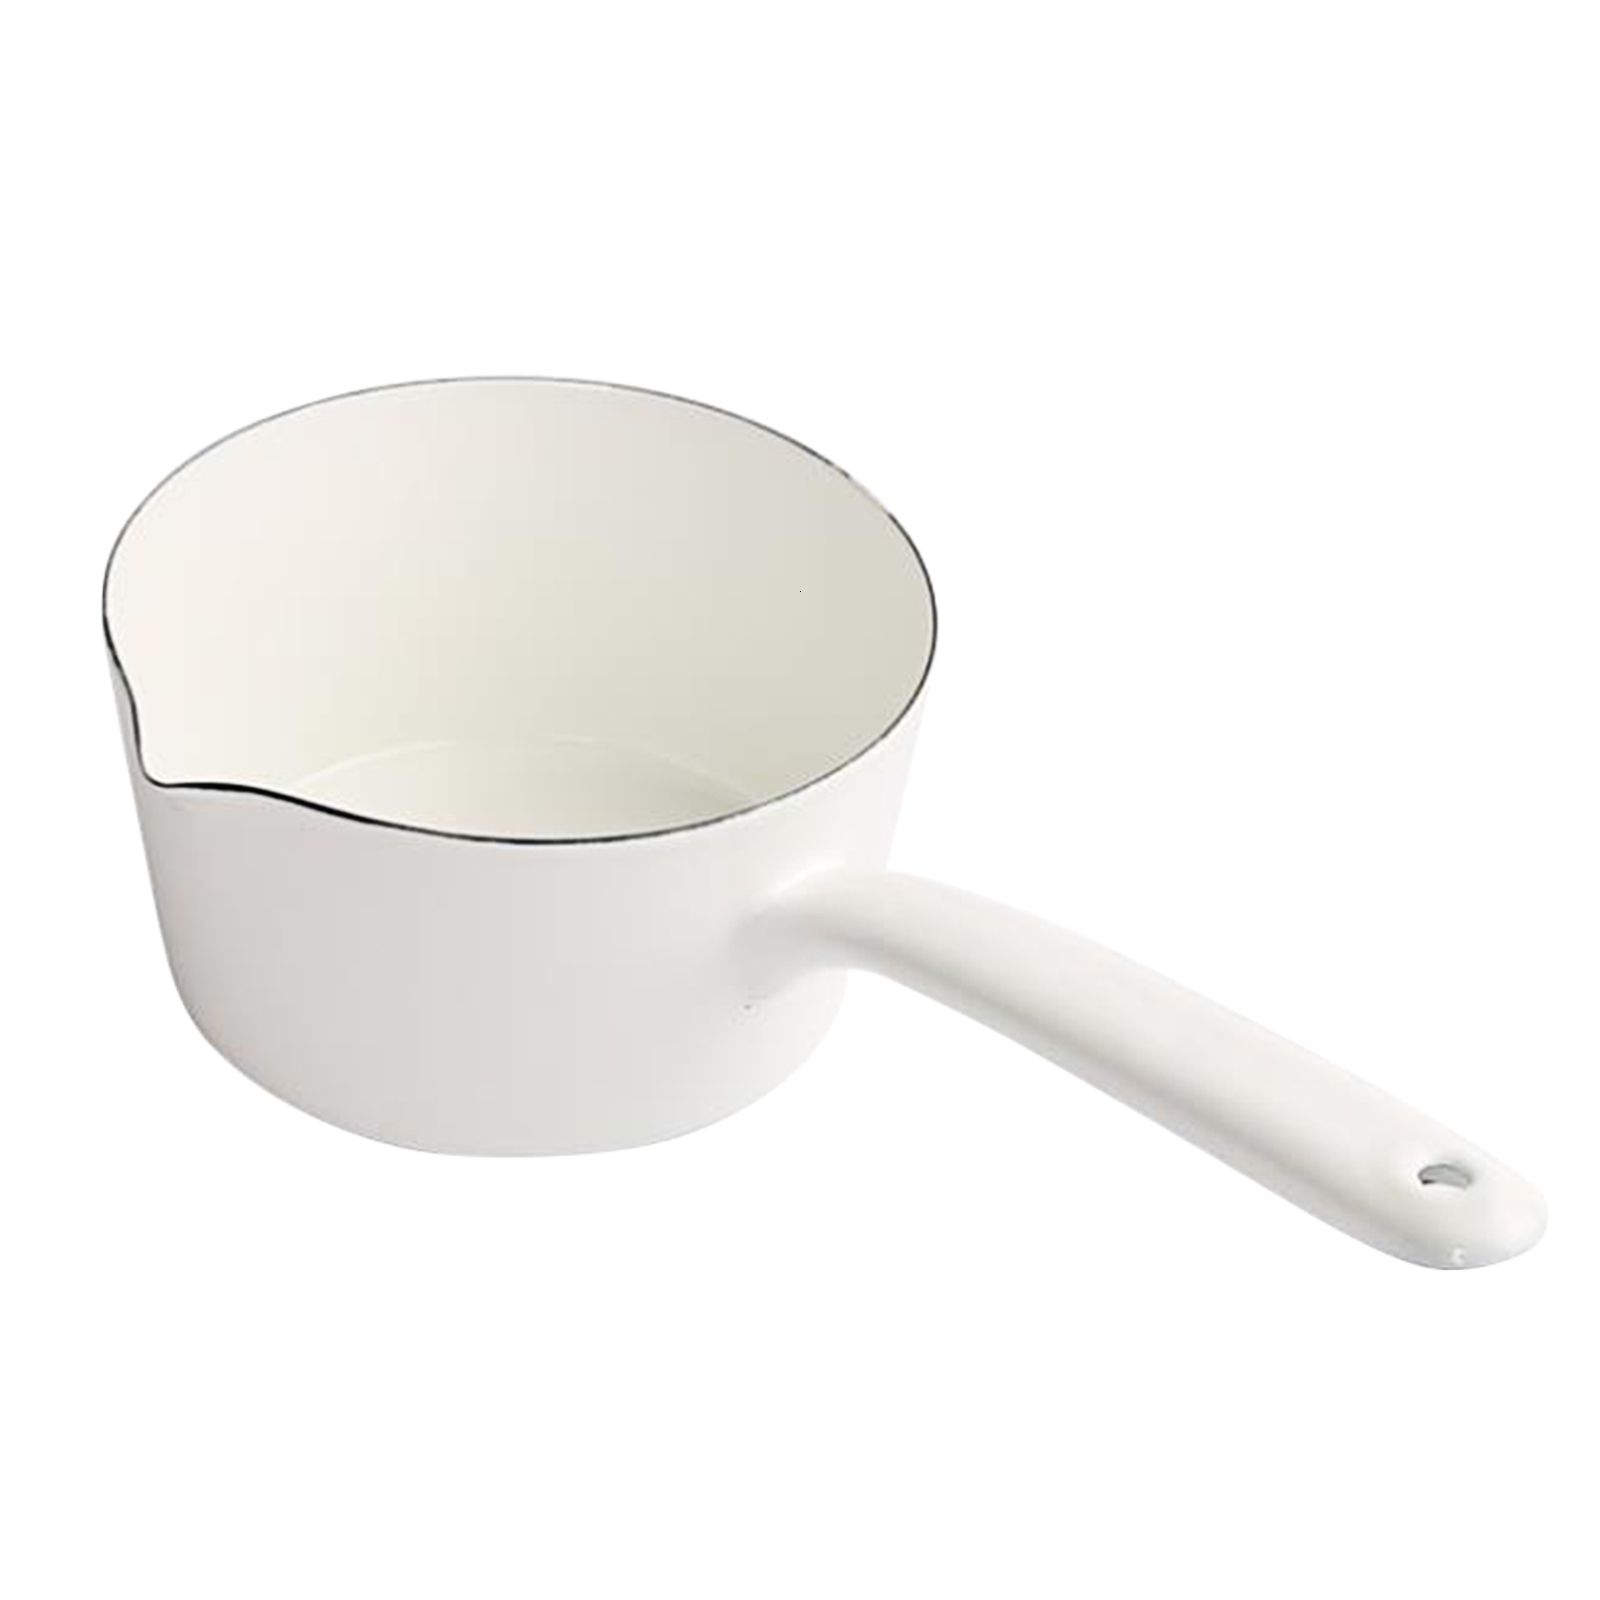 Milk Pot Durable Butter Warmer Pan For Stove Top Induction Cooker Sauce  Home Kitchen Tea Coffee Stainless Steel Multifunctional 230711 From Jin10,  $19.84